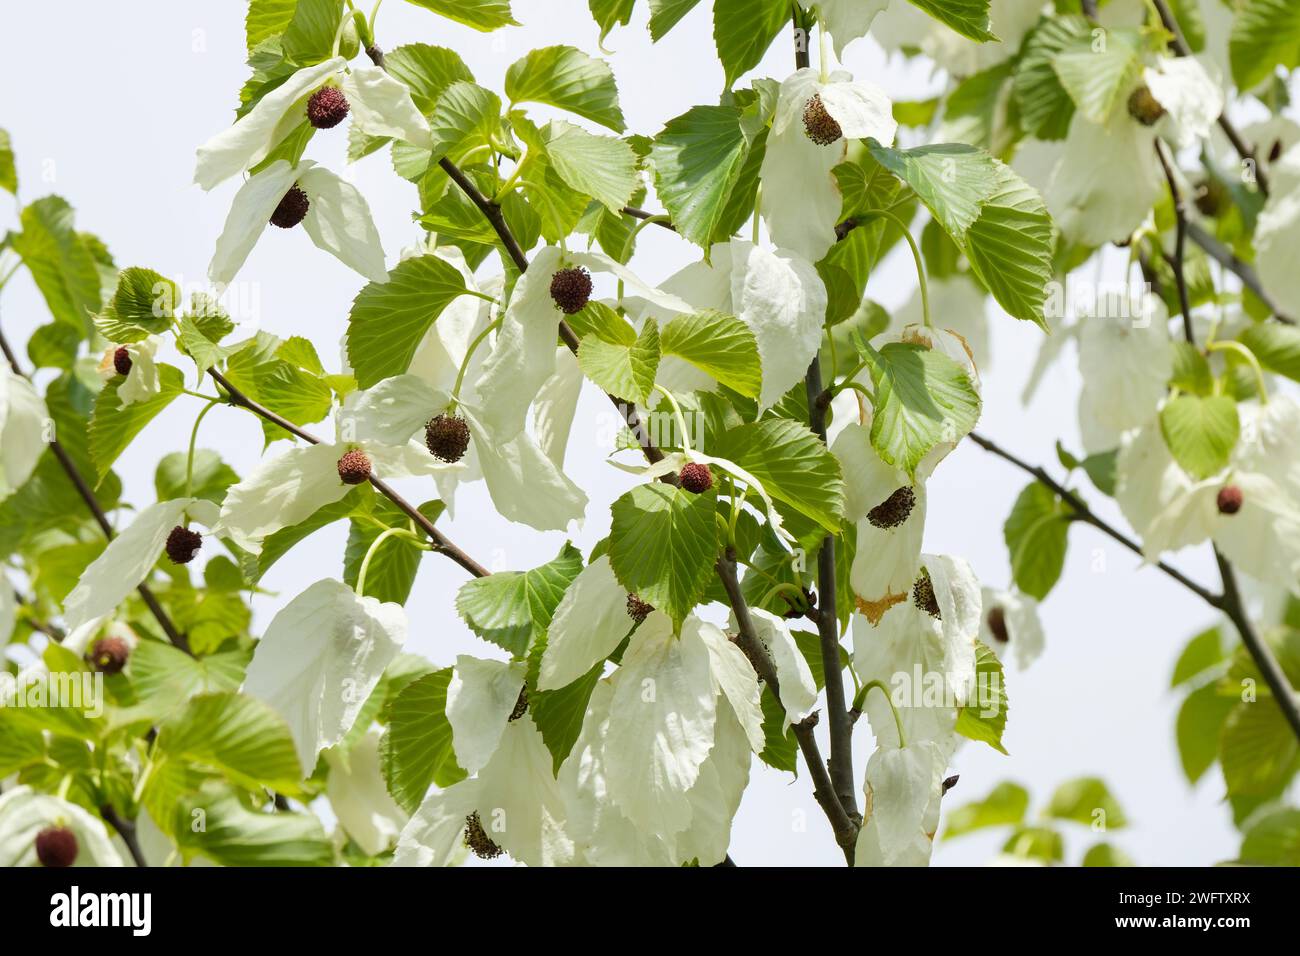 Davidia involucrata, dove-tree, handkerchief tree, ghost tree, arge, white bracts that hang like pinched handkerchiefs from its branches in May, Stock Photo